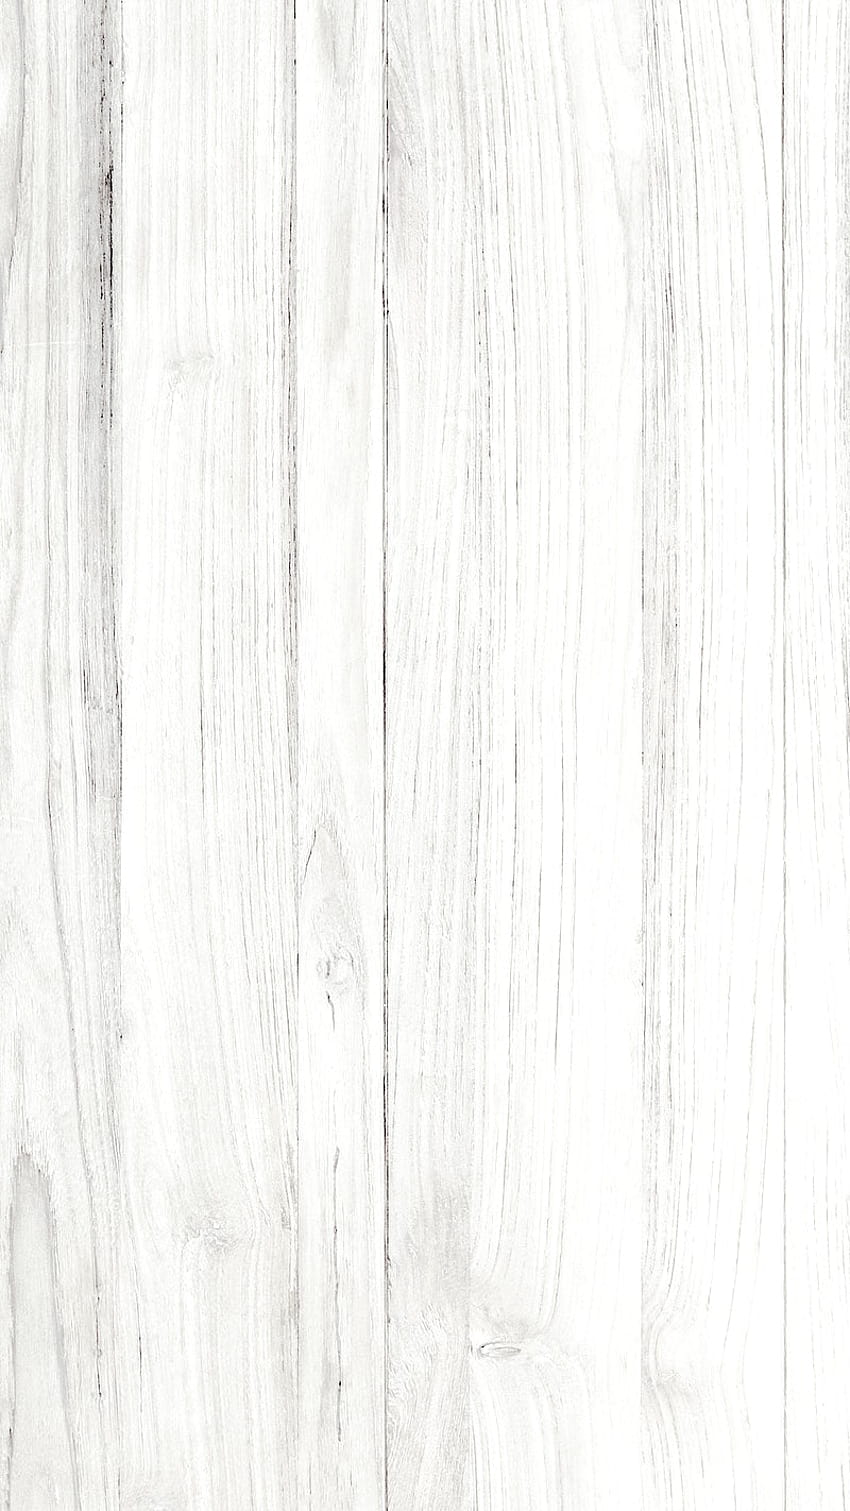 Vectors, PNGs, Mockups & Backgrounds, white wooden HD phone wallpaper